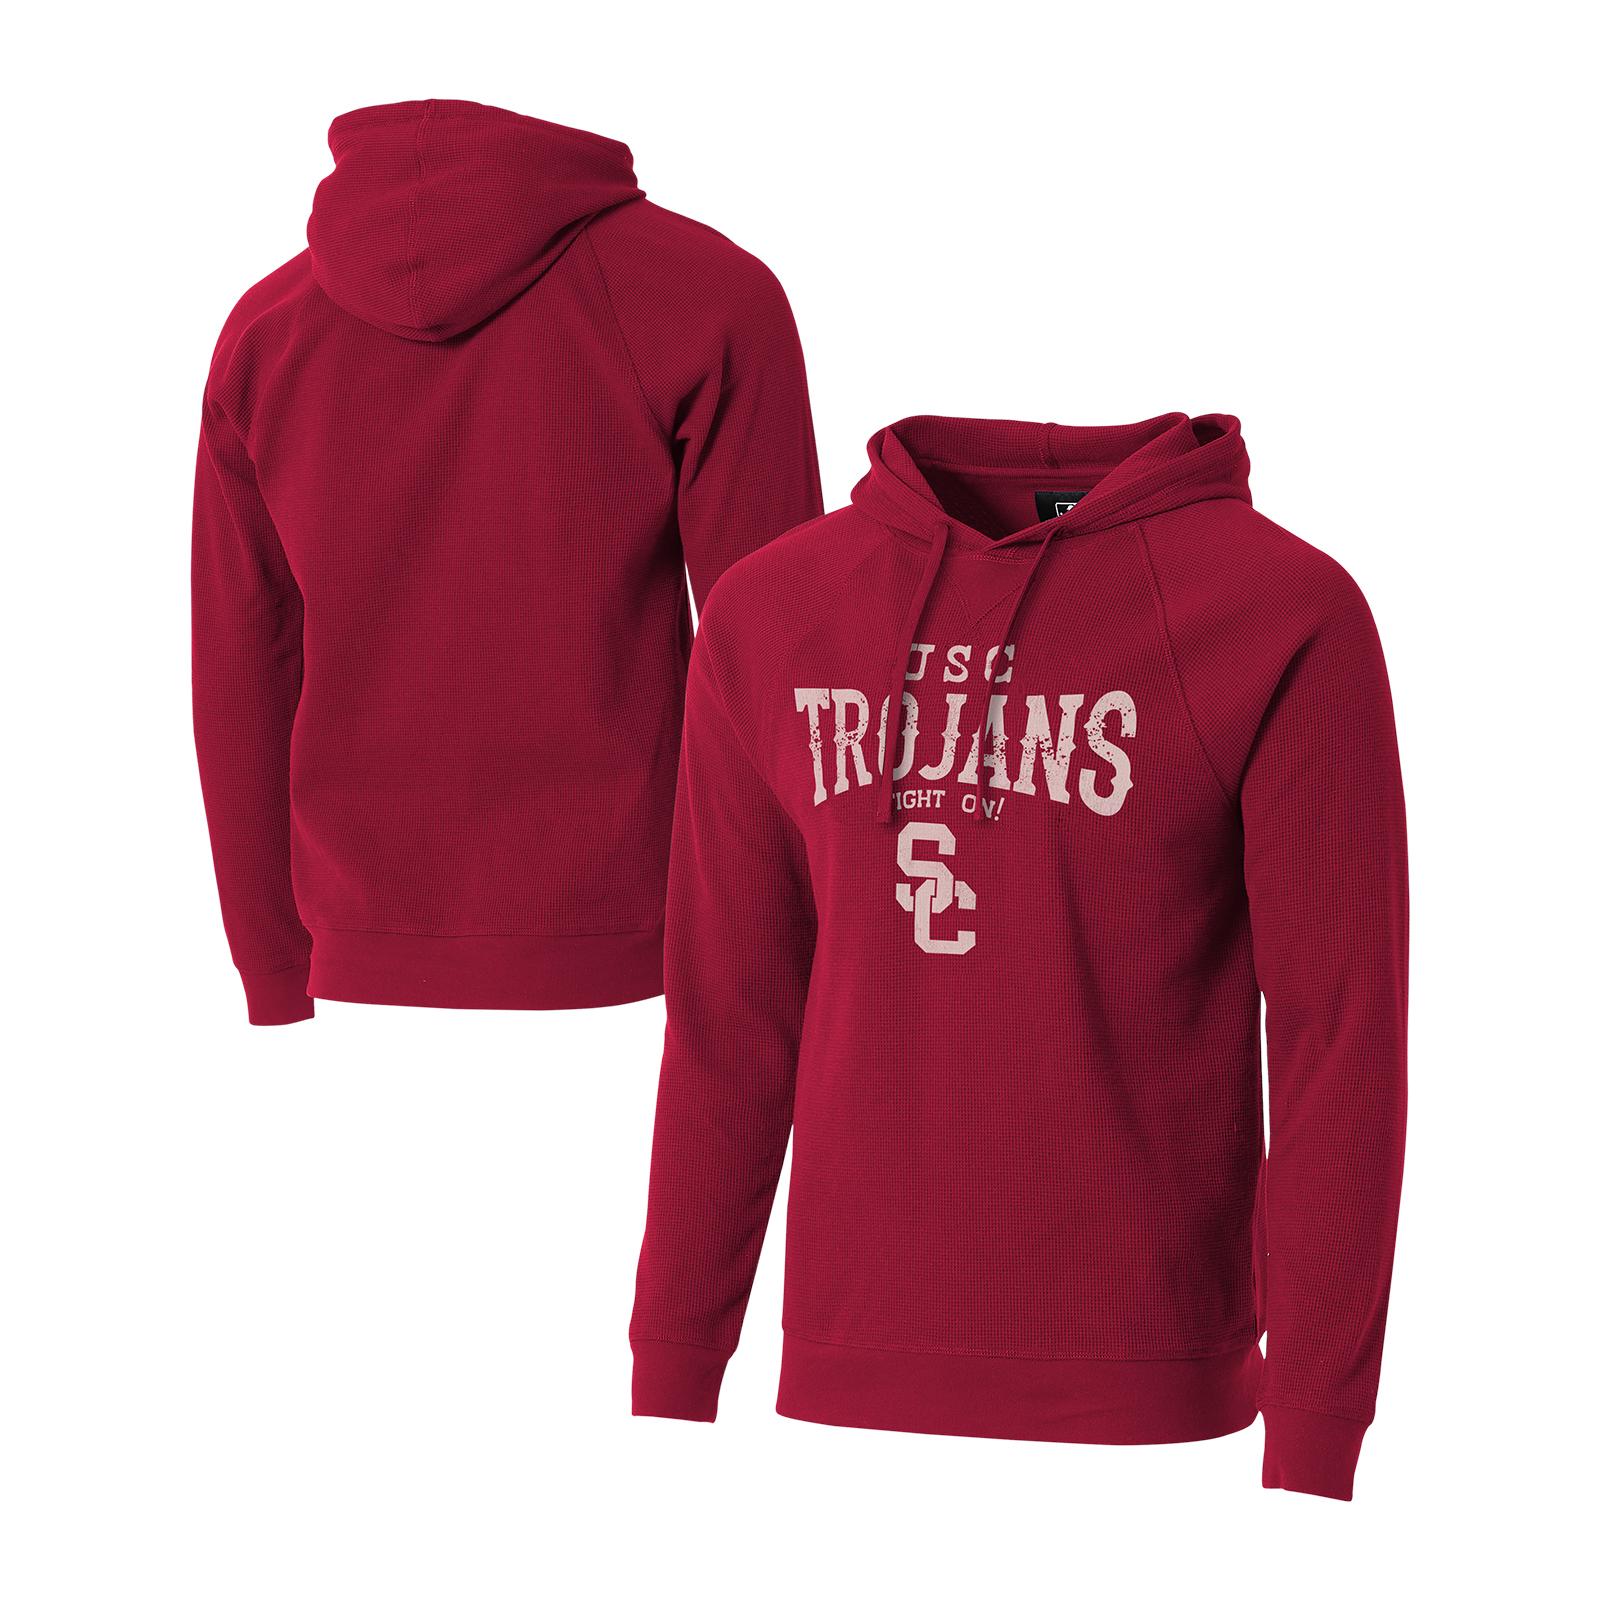 USC Trojans Mens Waffle Knit Pullover Hoodie image01